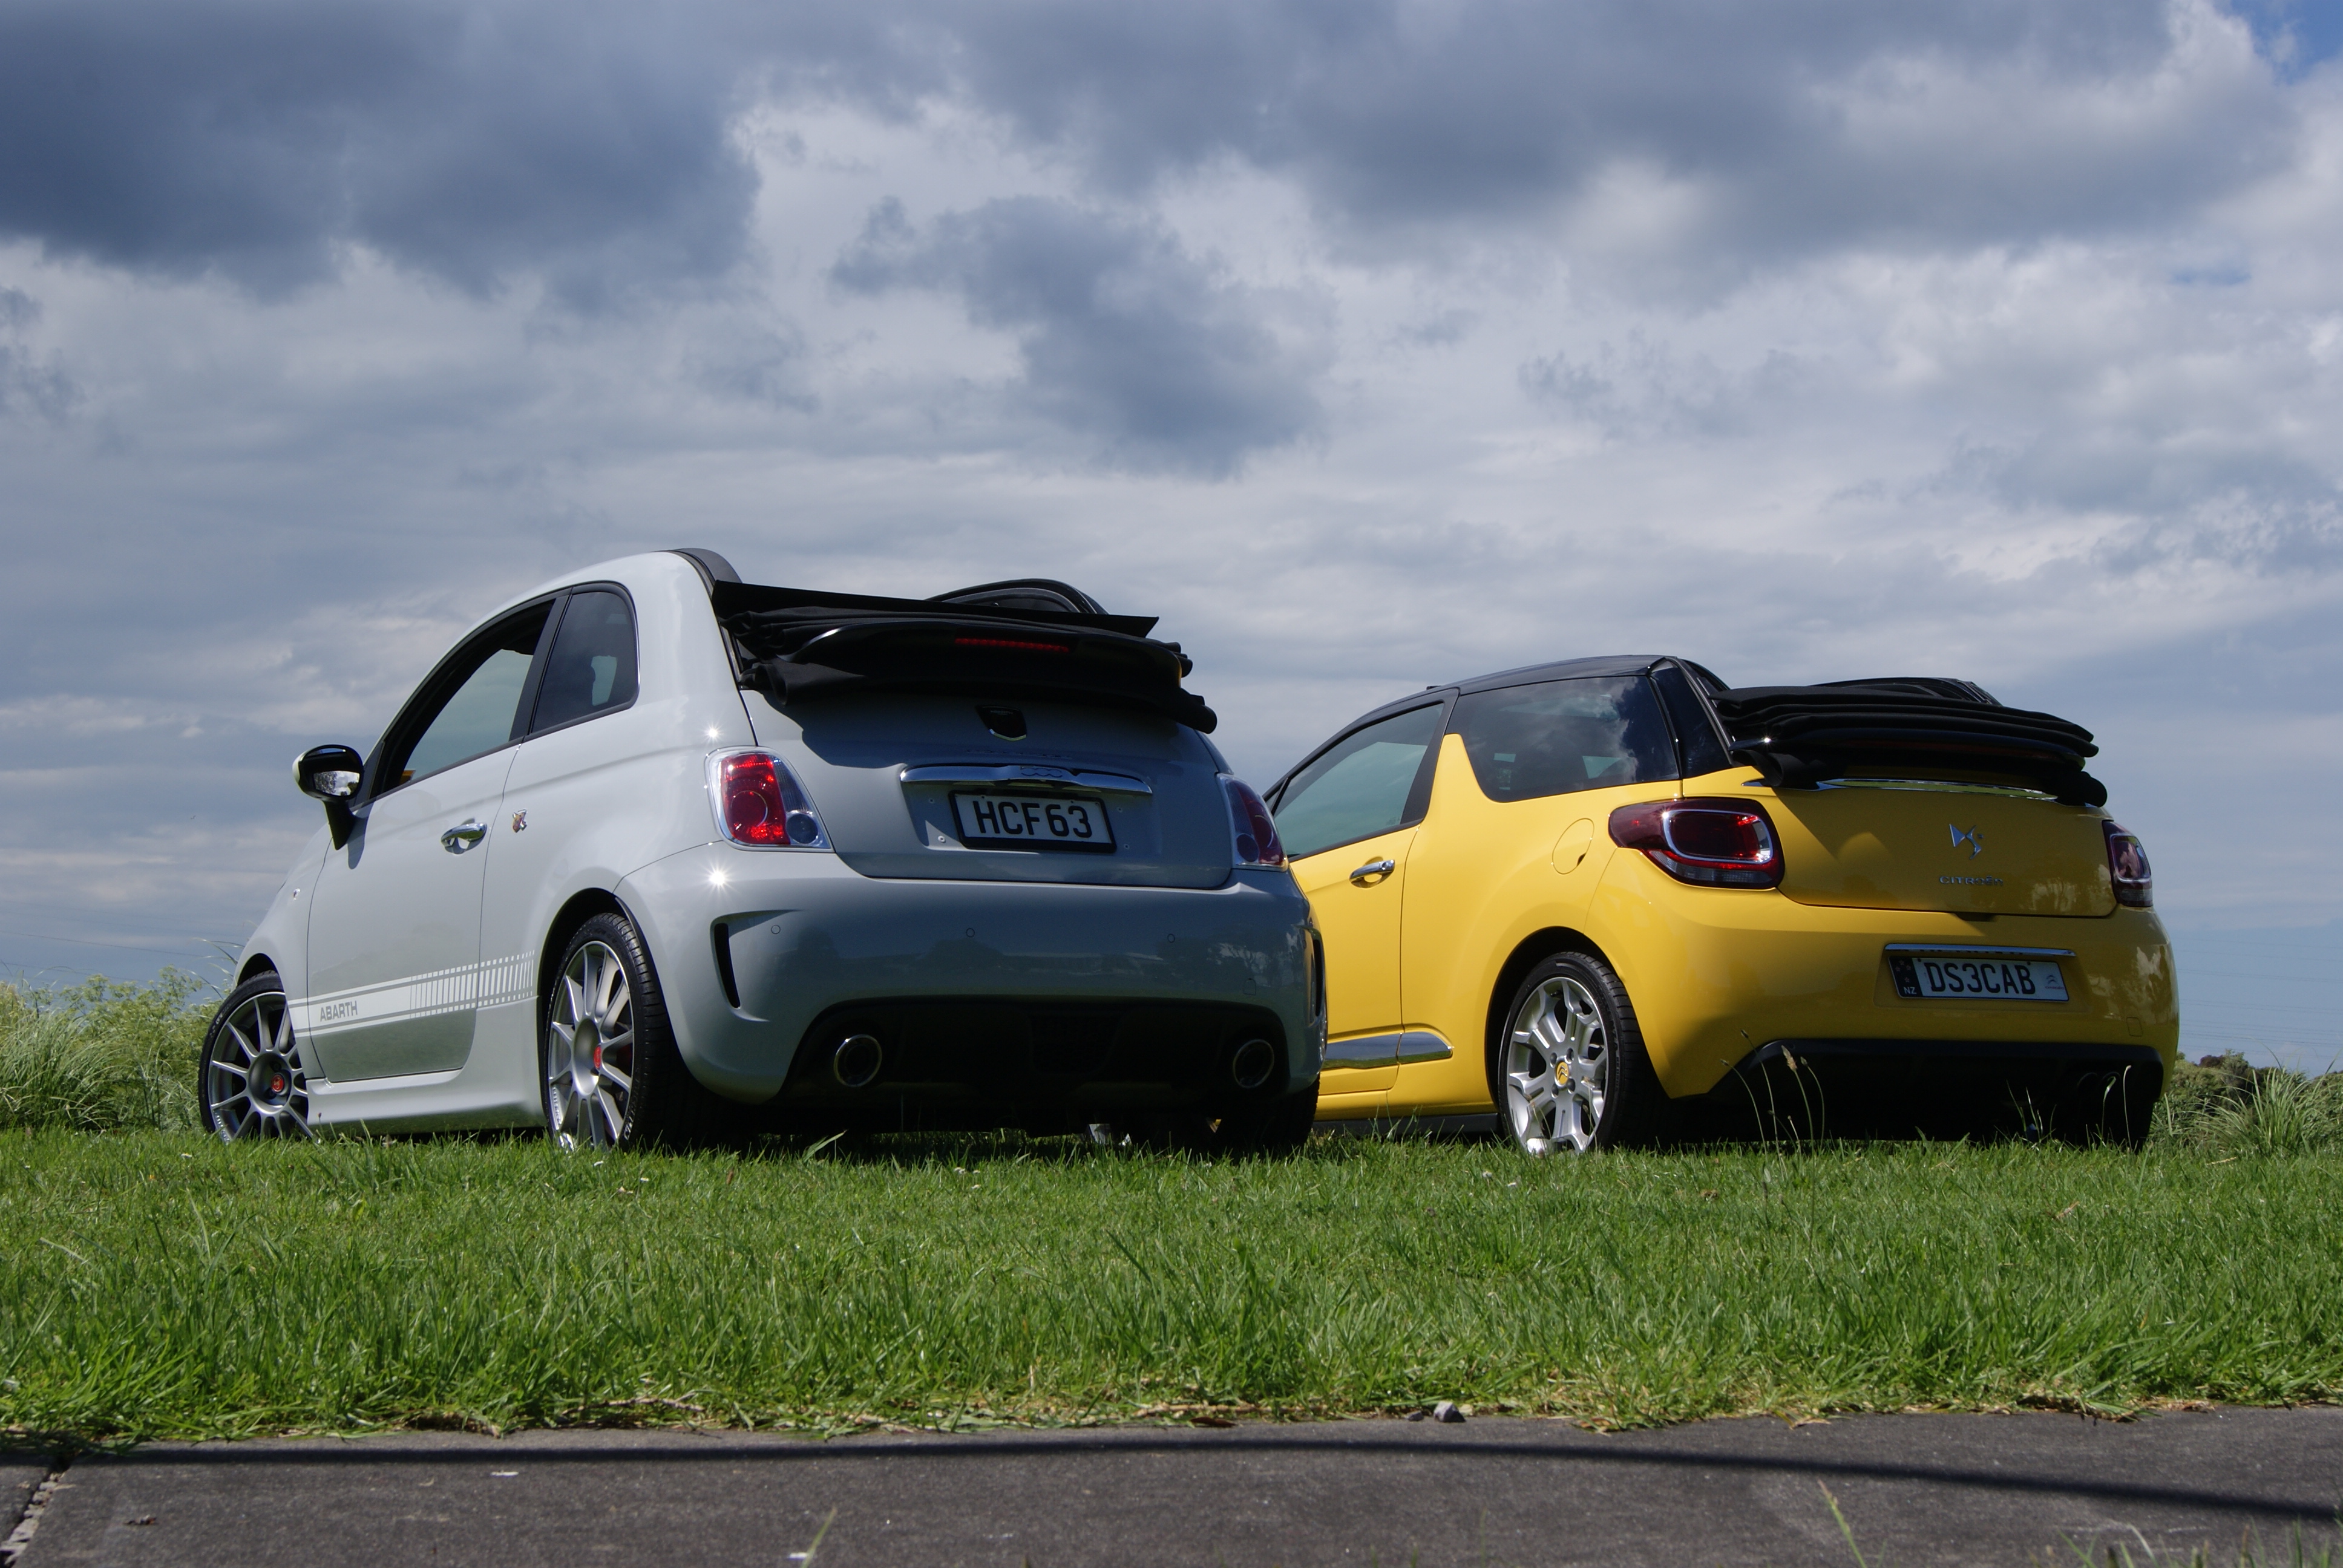 Fiat Punto: Cheap as chips - and it's Italian - NZ Herald